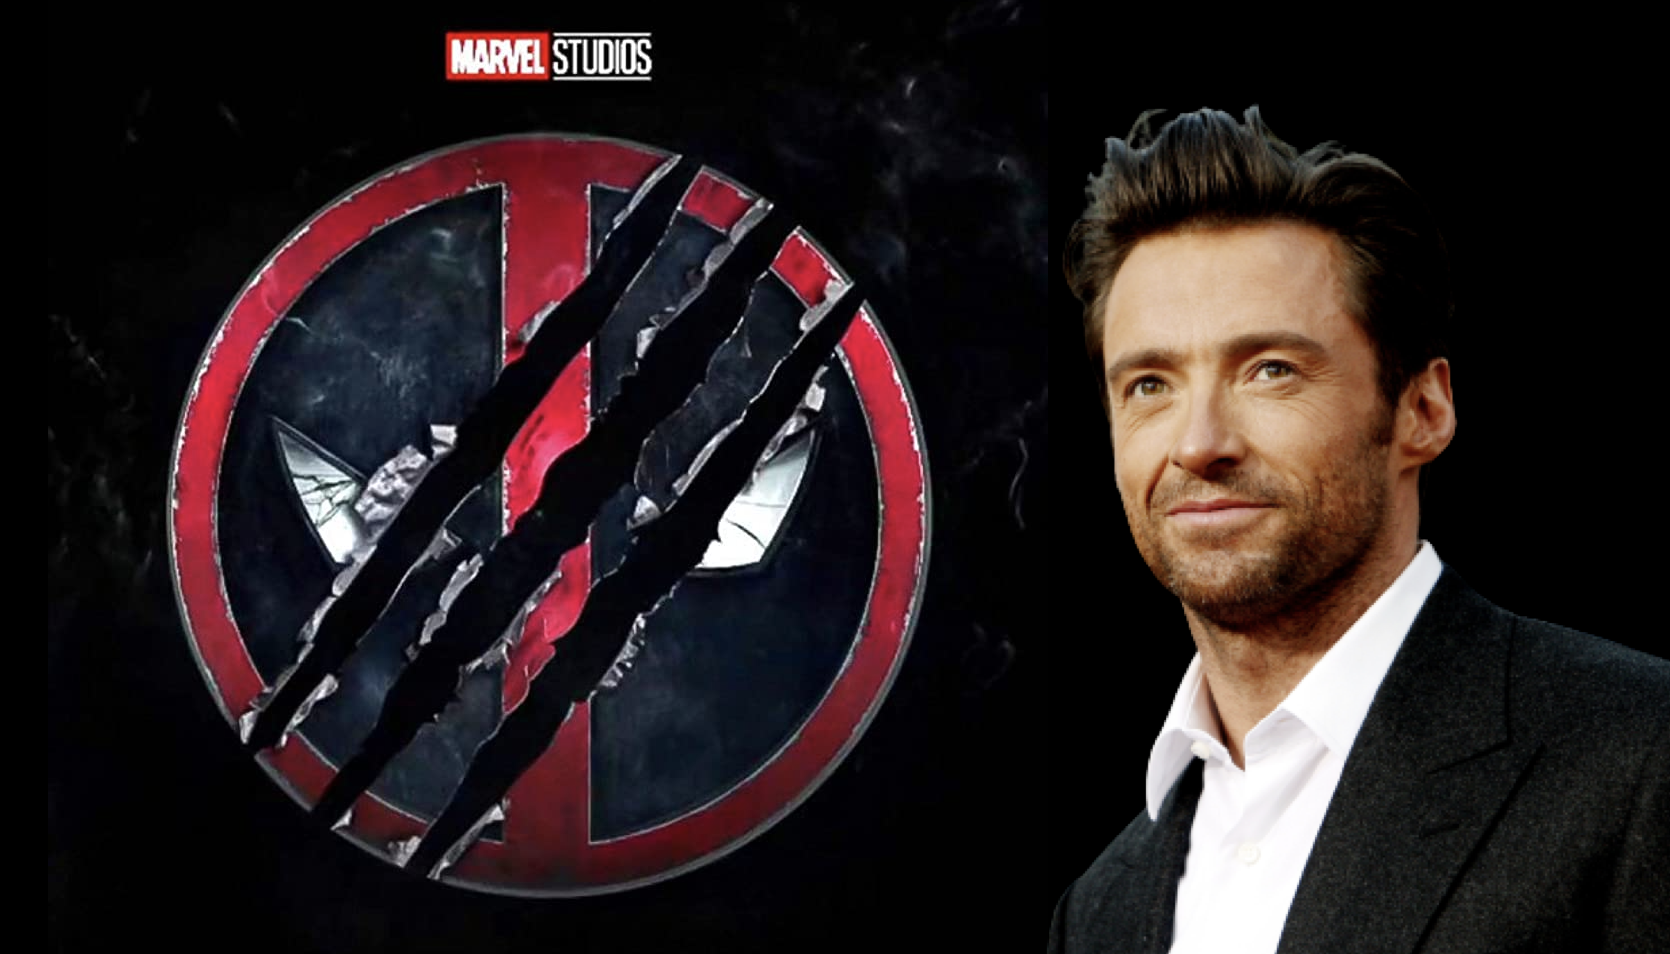 Hugh Jackman May Have Just Leaked The Official Title For Marvel’s Next ‘Deadpool’ Film